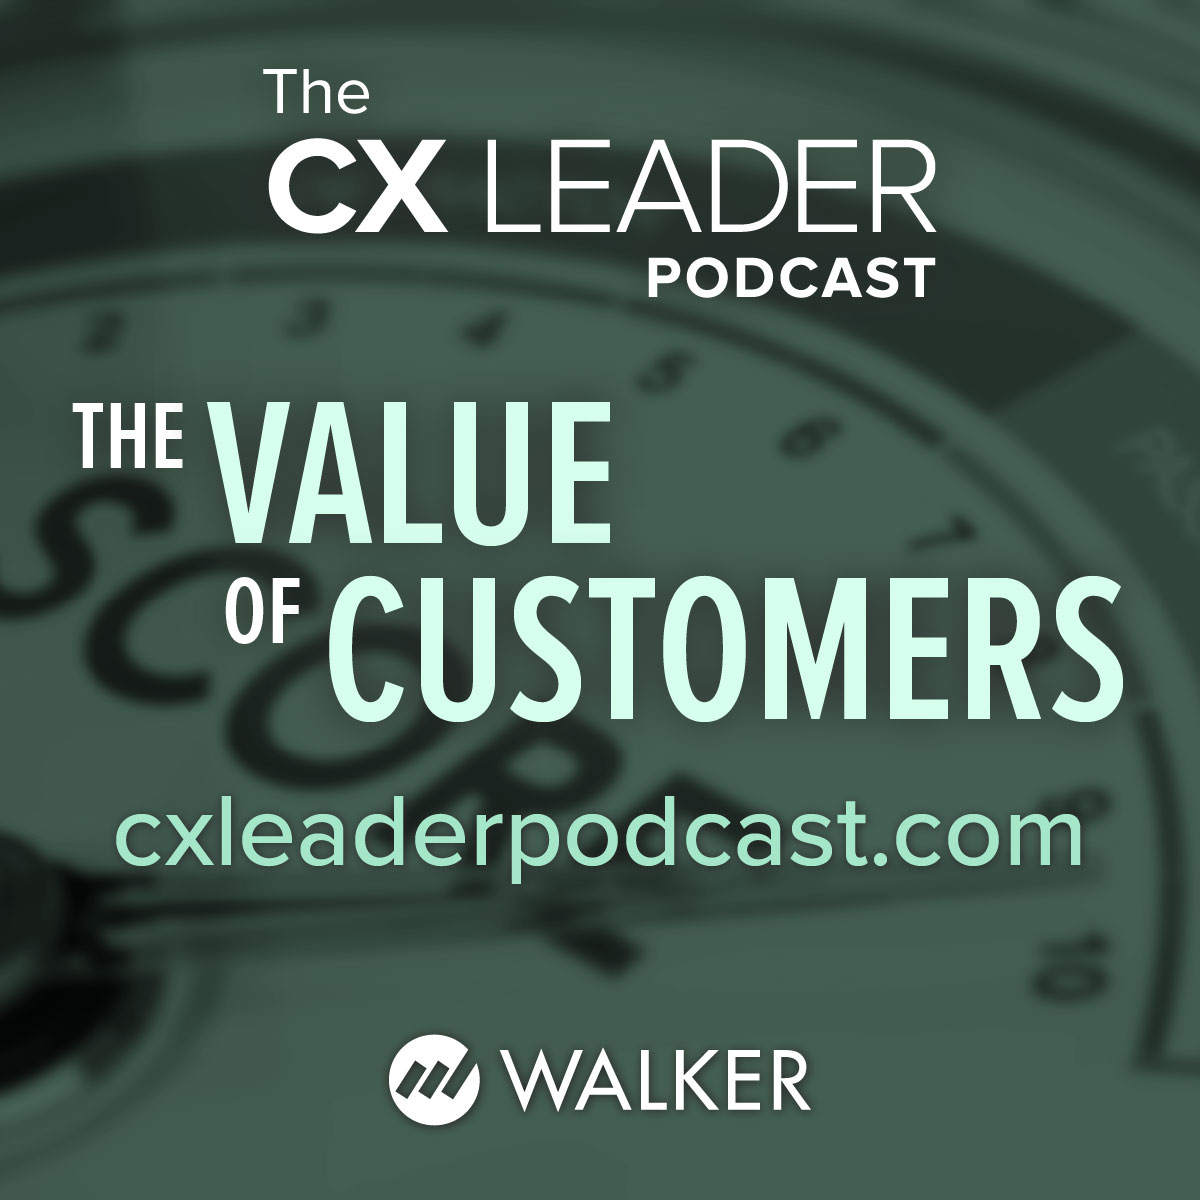 The Value of Customers, part 1